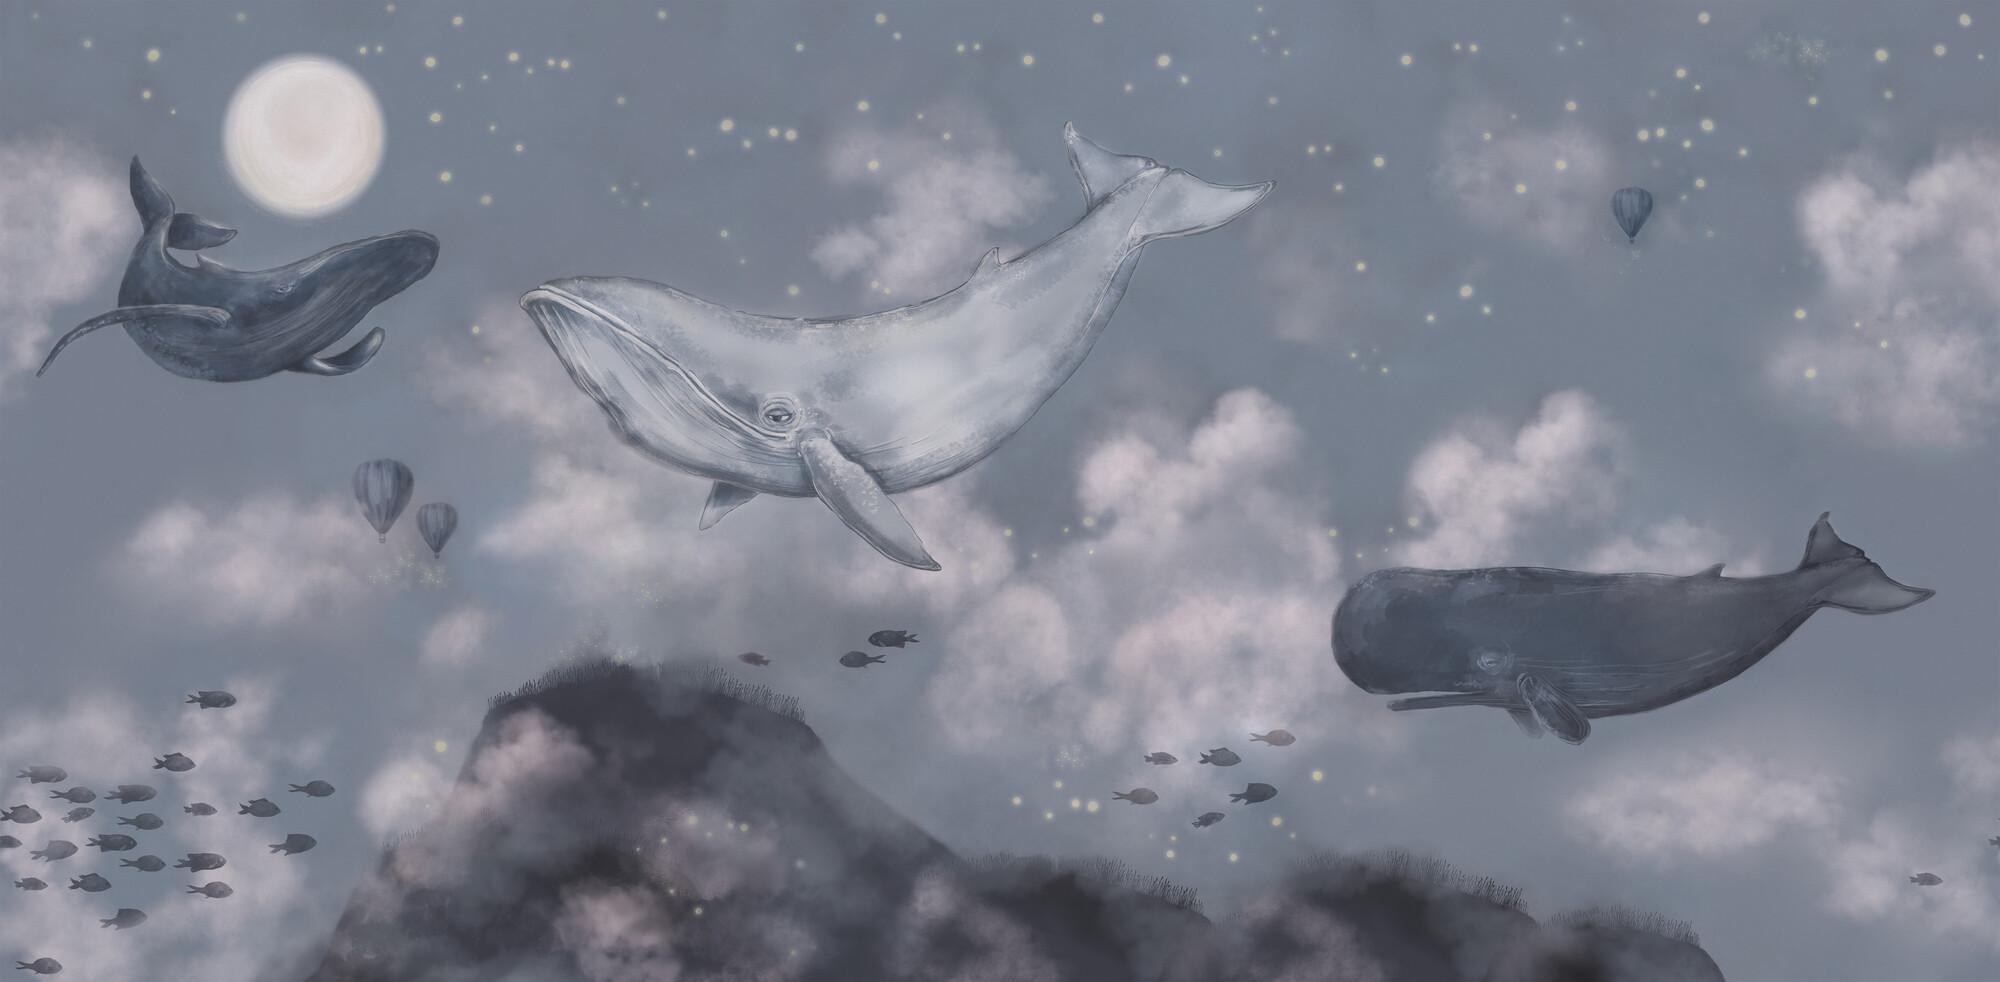 Whales in the sky PW212802 Mr. Perswall Wallpaper